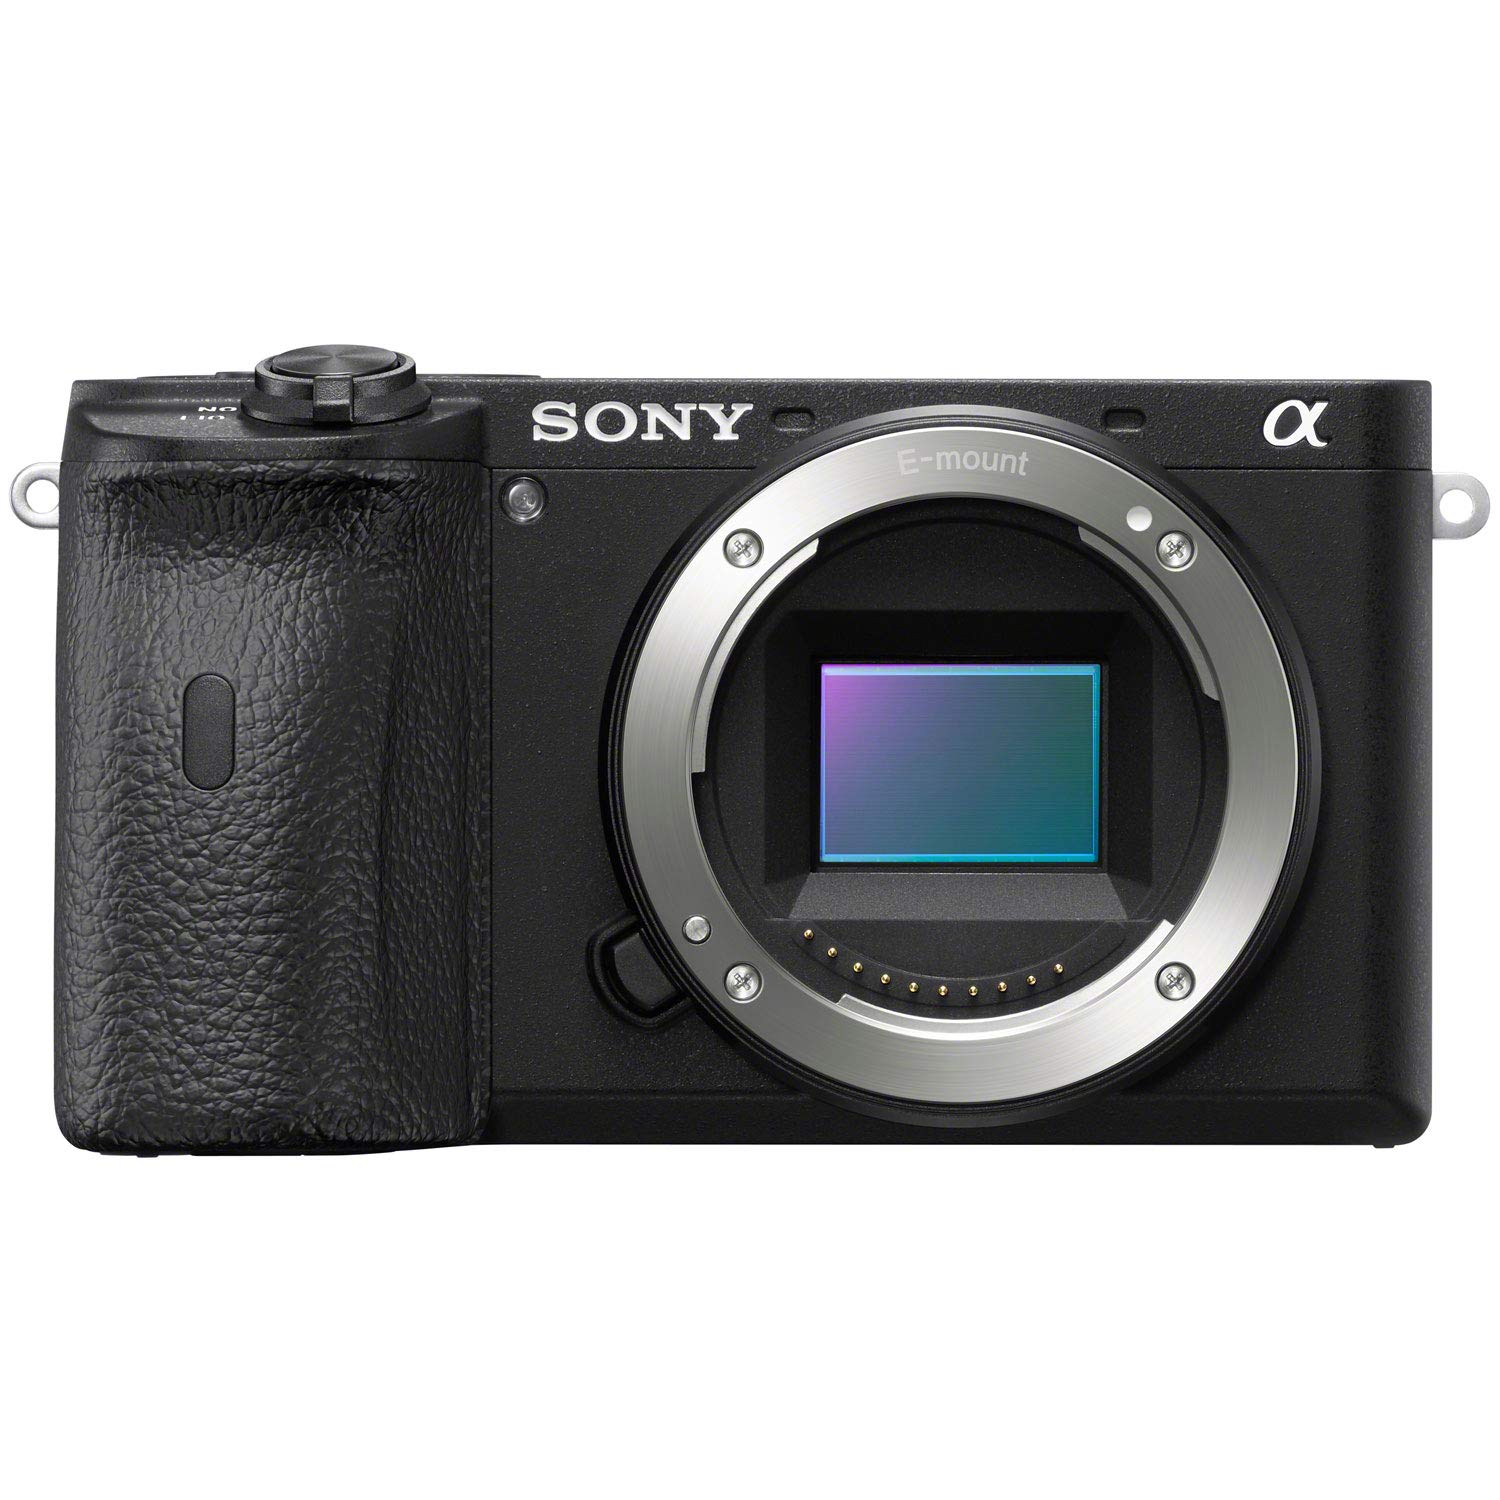 Sony a6600 Mirrorless Camera 4K APS-C Body Only Interchangeable Lens Camera ILCE-6600B with Deco Gear Case + Extra Battery + Flash + Wireless Remote + 64GB Memory Card + Software + Accessories Bundle